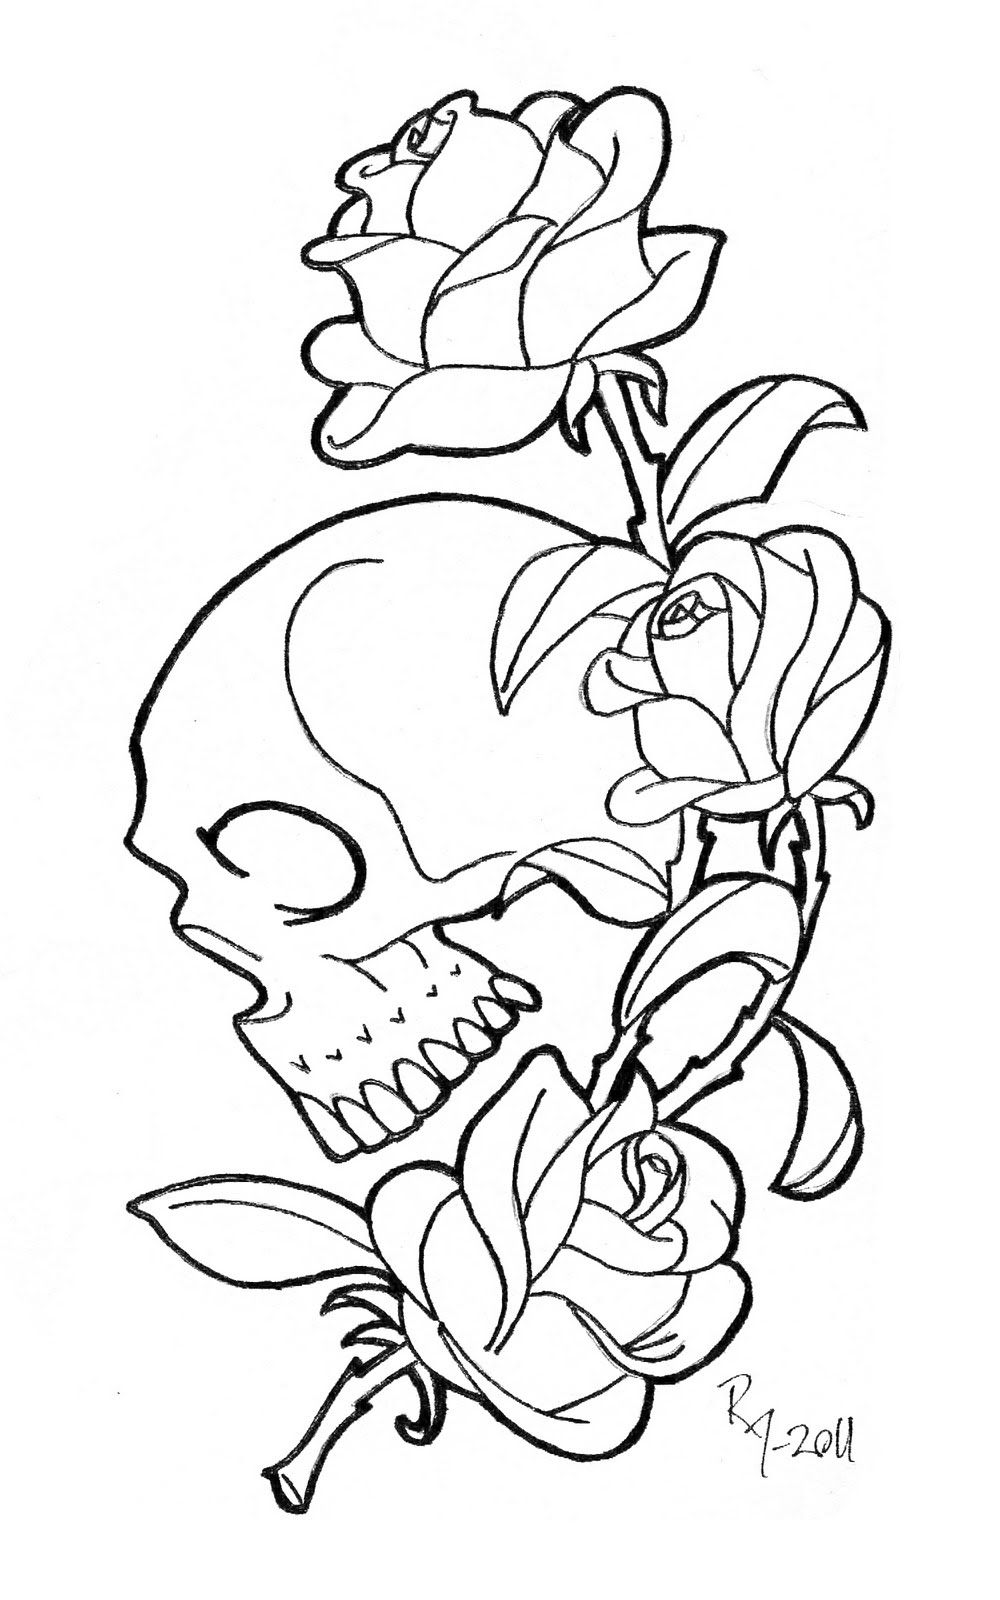 Skull With Roses Coloring Pages | Tattoo coloring book, Rose coloring pages,  Skull coloring pages